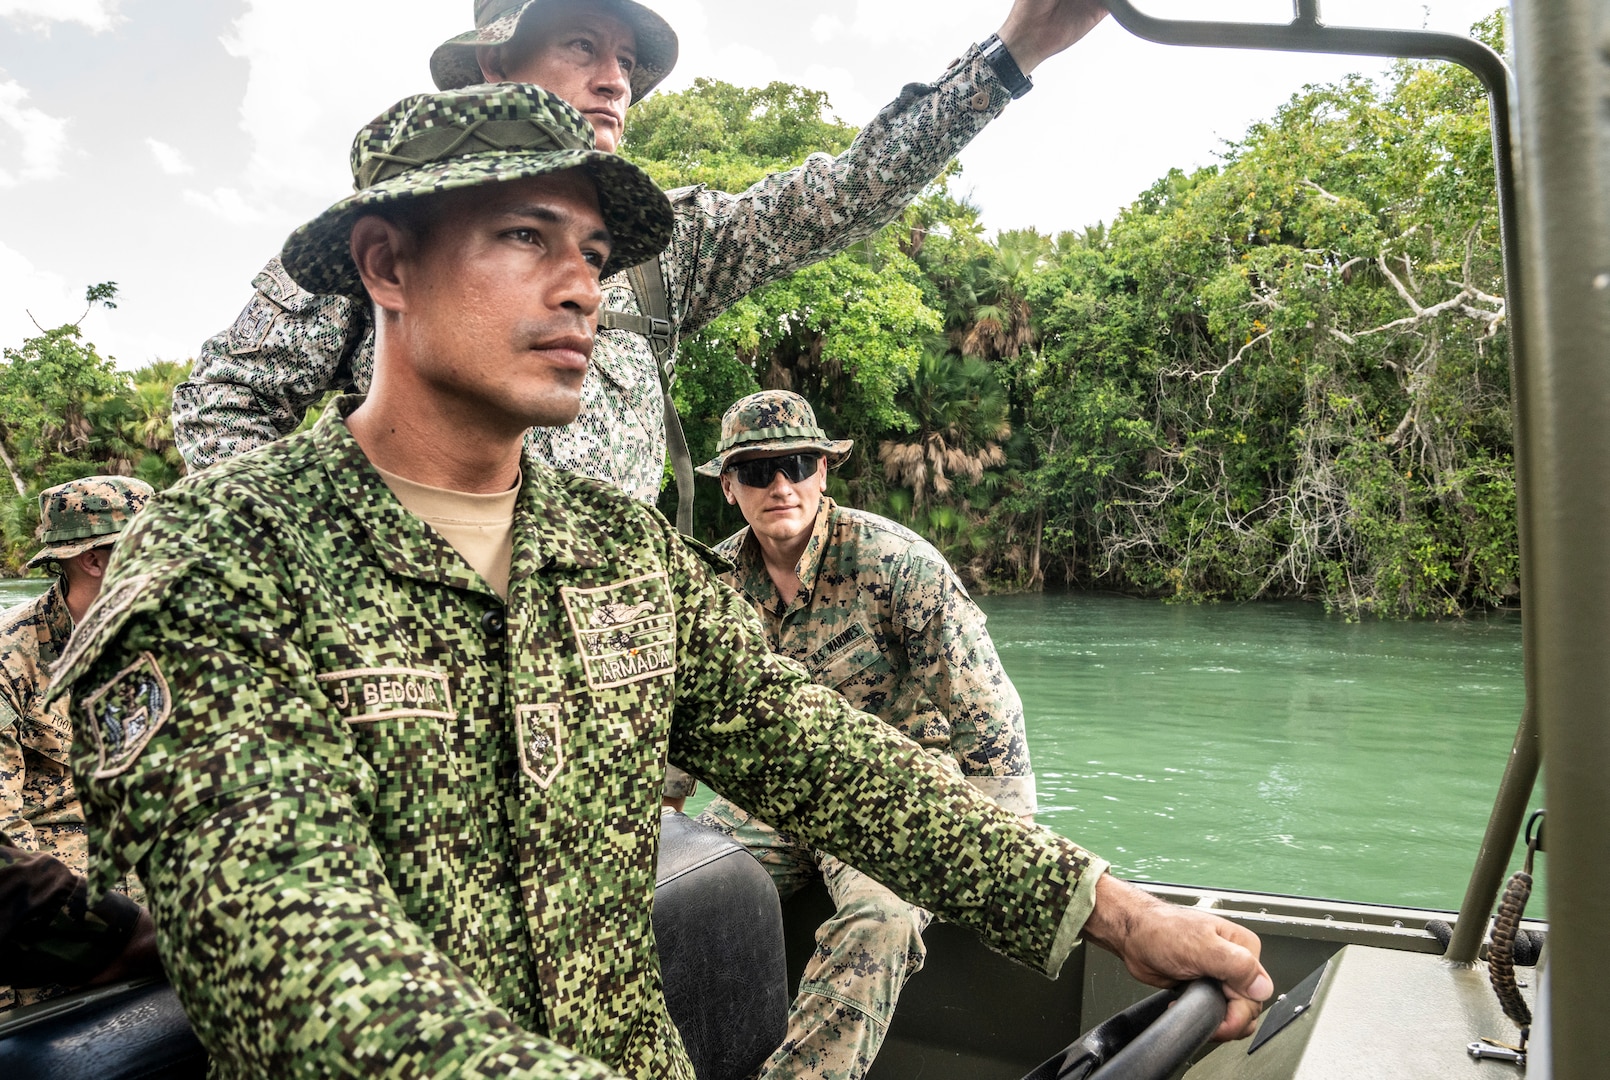 A Colombian Marine alongside U.S. Marines with 3rd Force Reconnaissance company, 4th Marine division, drives a Belizean interdiction vessel during exercise Tradewinds 2022, at Cocoyal outpost, Mexico, May 11, 2022. TW22 is a U.S. Southern Command-sponsored Caribbean-focused multi-dimensional exercise conducted in the ground, air, sea, and cyber domains, designed to provide participating nations opportunities to conduct joint, combined, and interagency training focused on increasing regional cooperation and interoperability in complex multinational security operations.